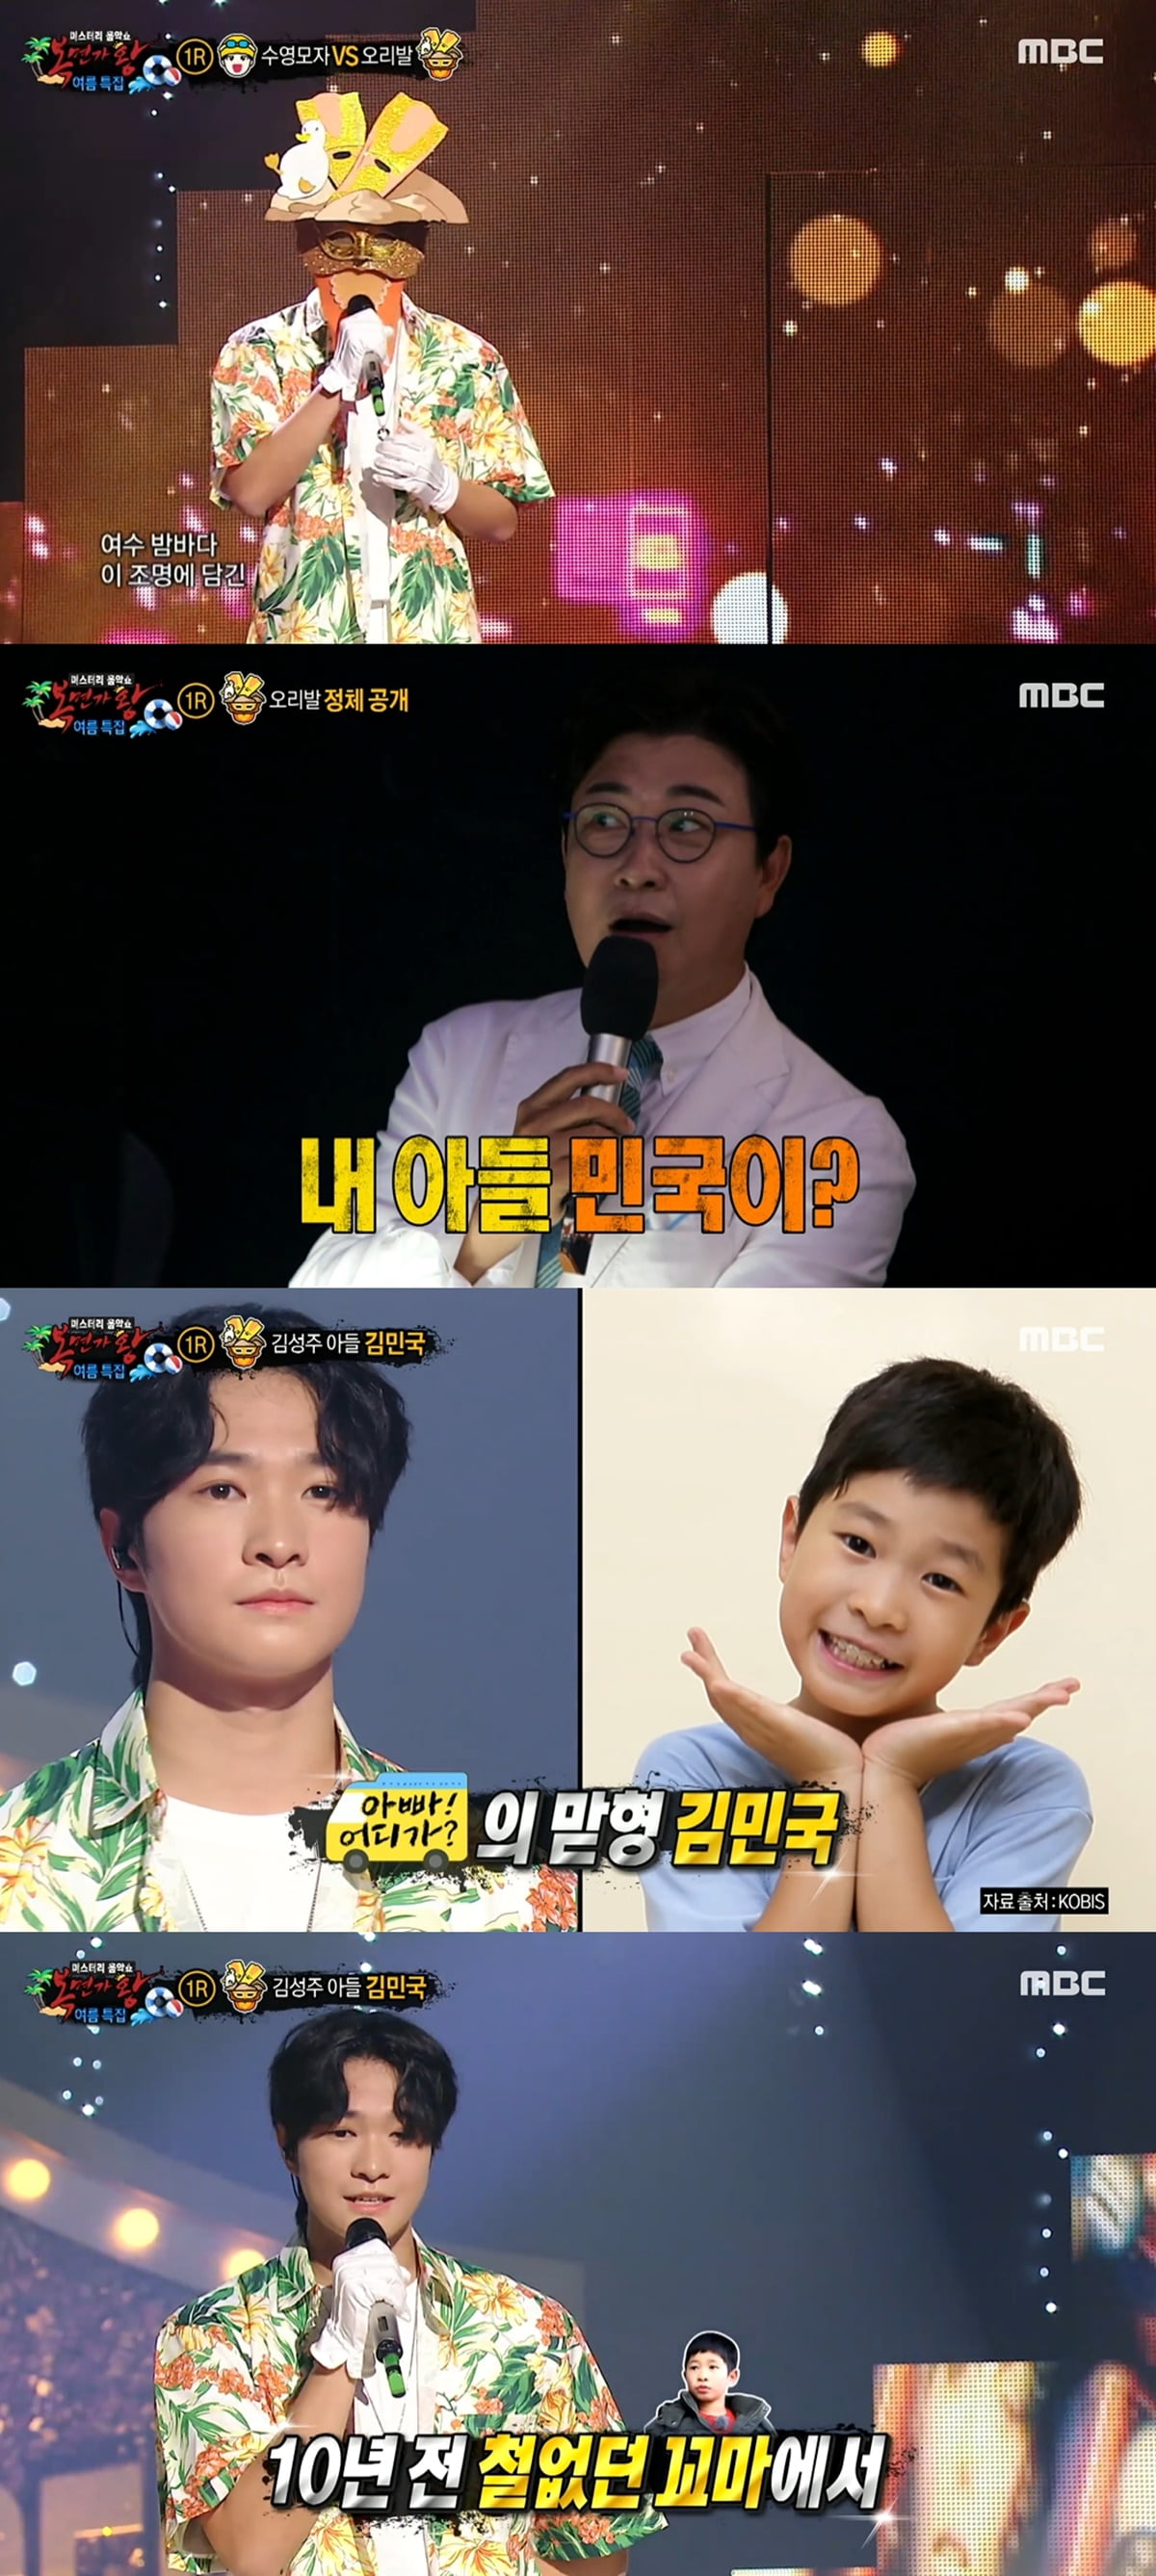 Kim Seong-joo, tricked by his son's method acting "Scary Program"